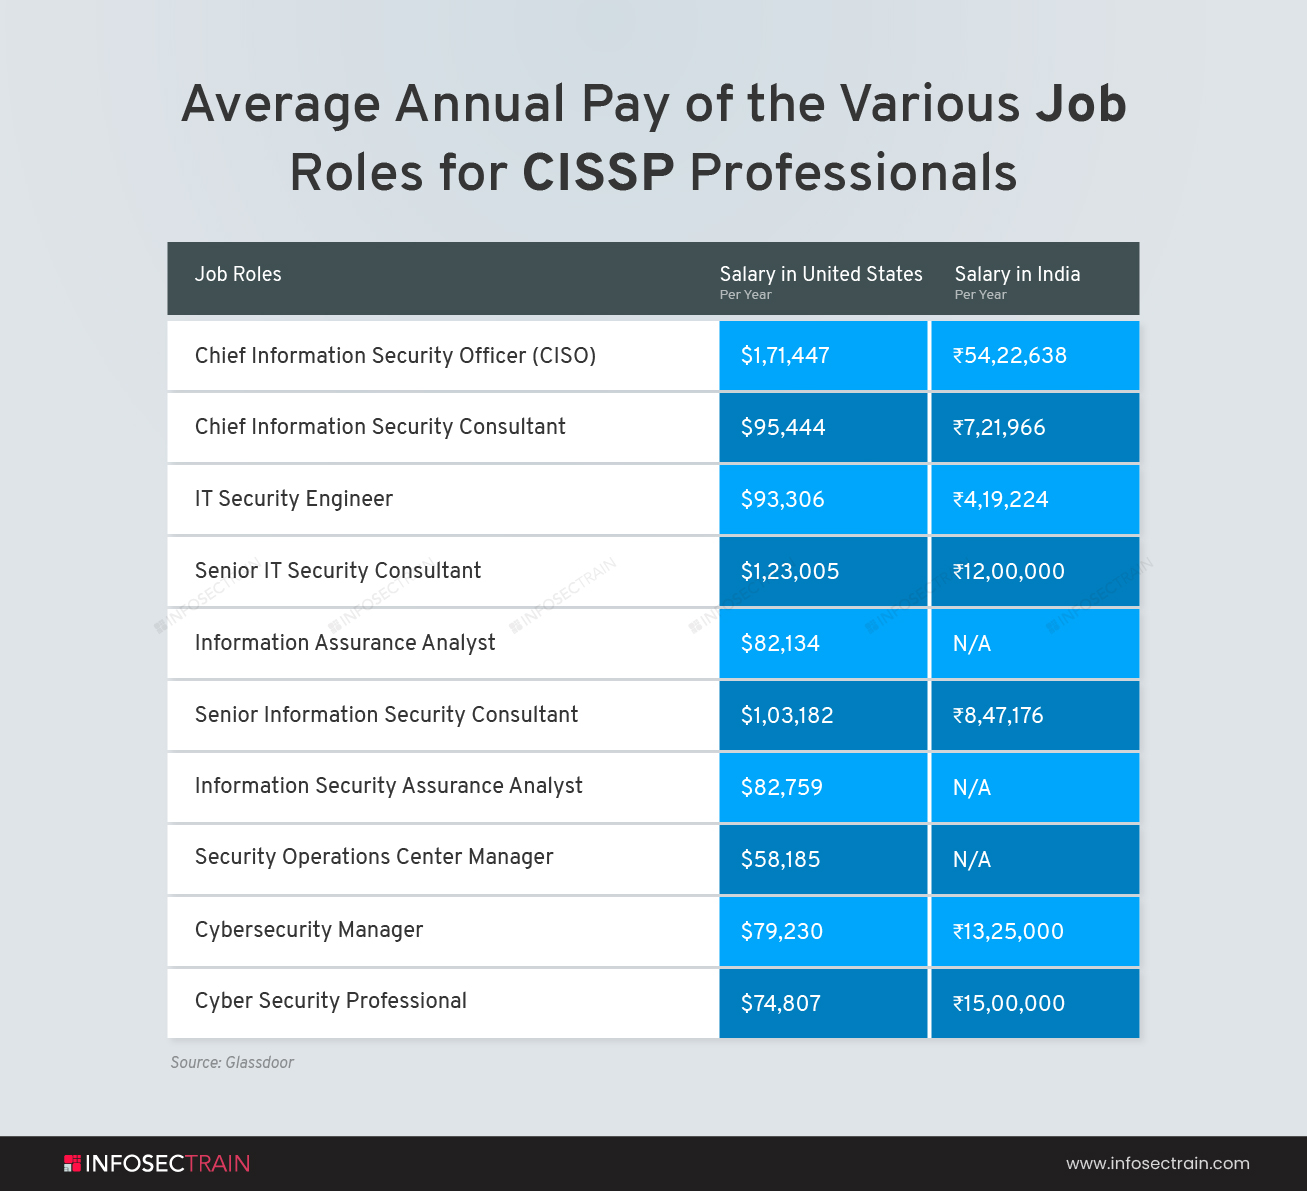 Average Annual Pay of the Various Job Roles for CISSP Professionals